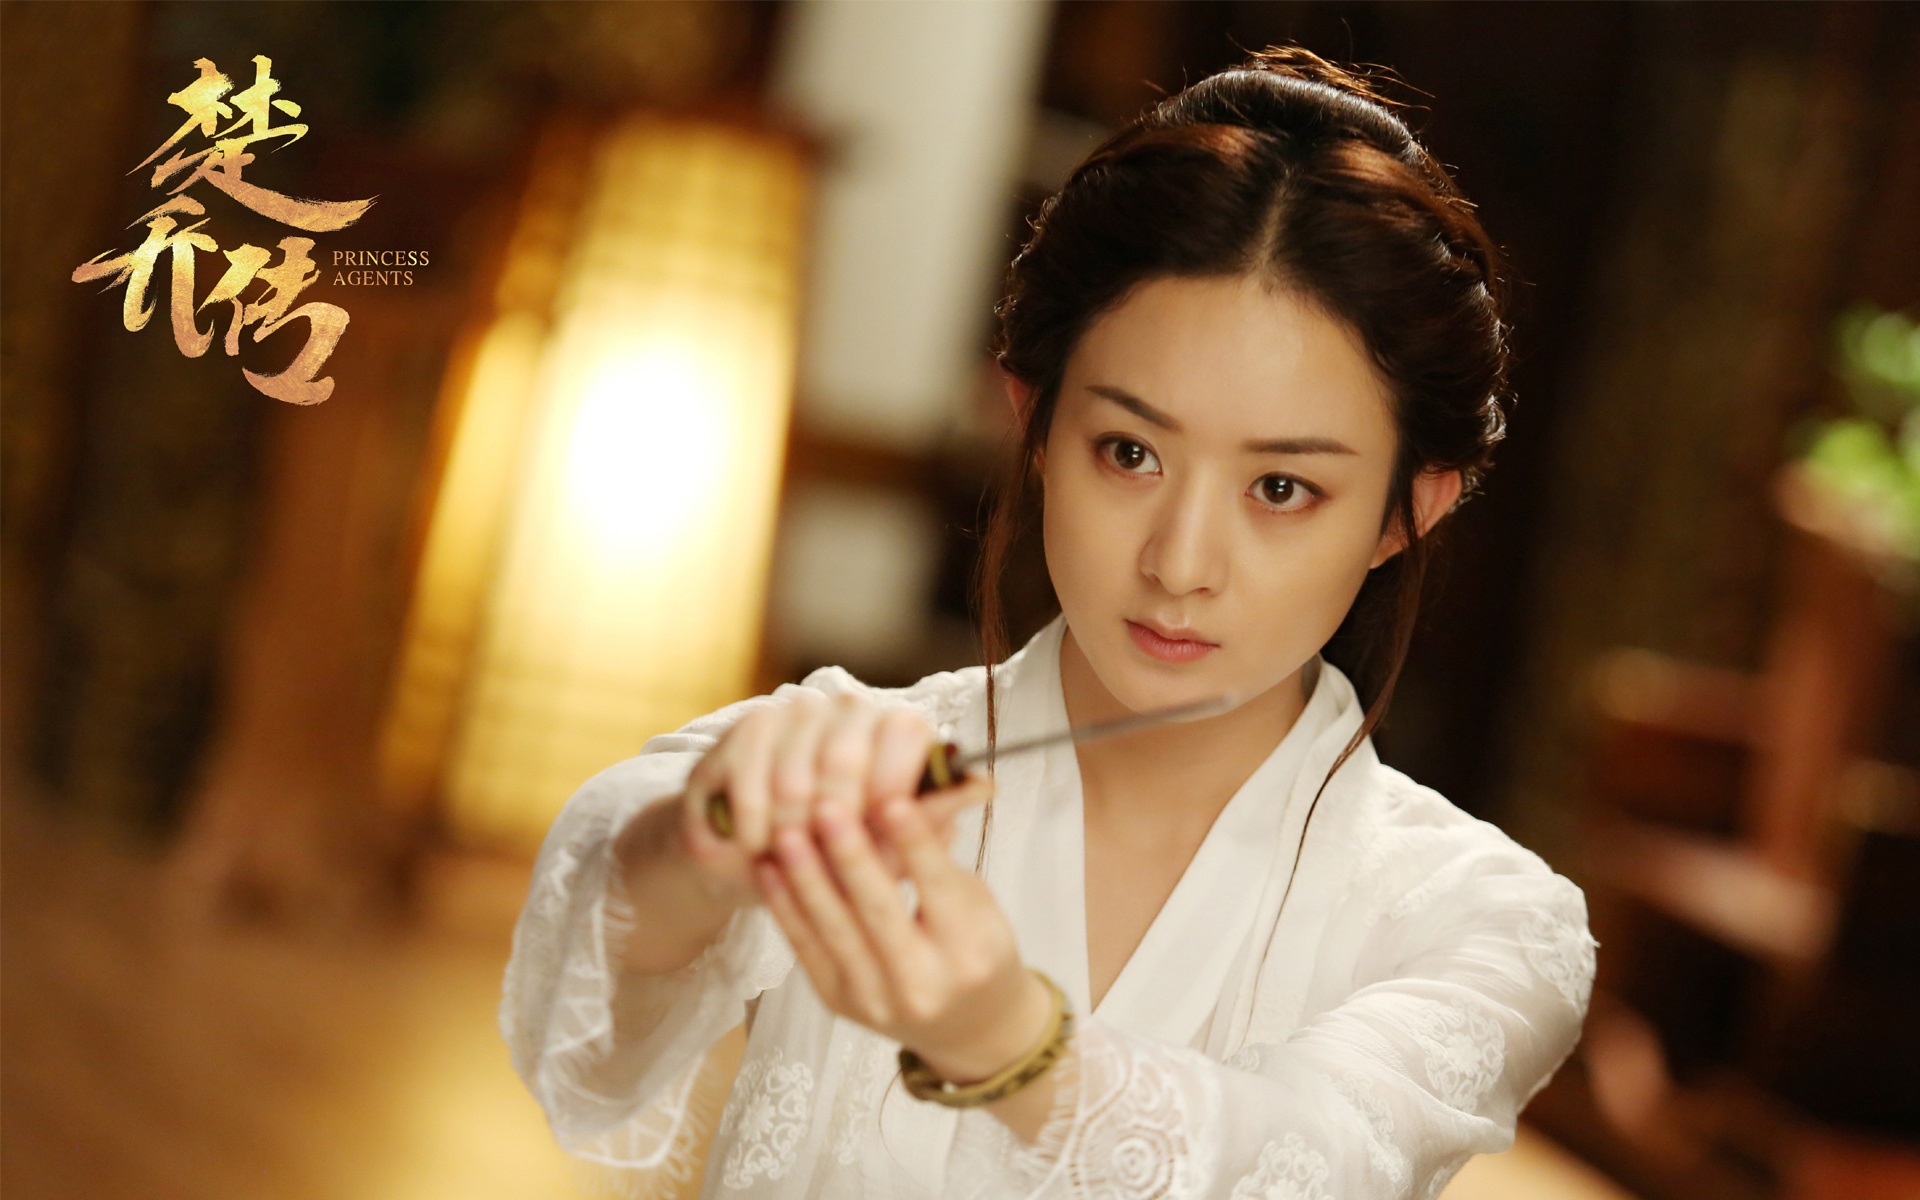 Wallpaper Zhao Liying Princess Agents HD Picture Image